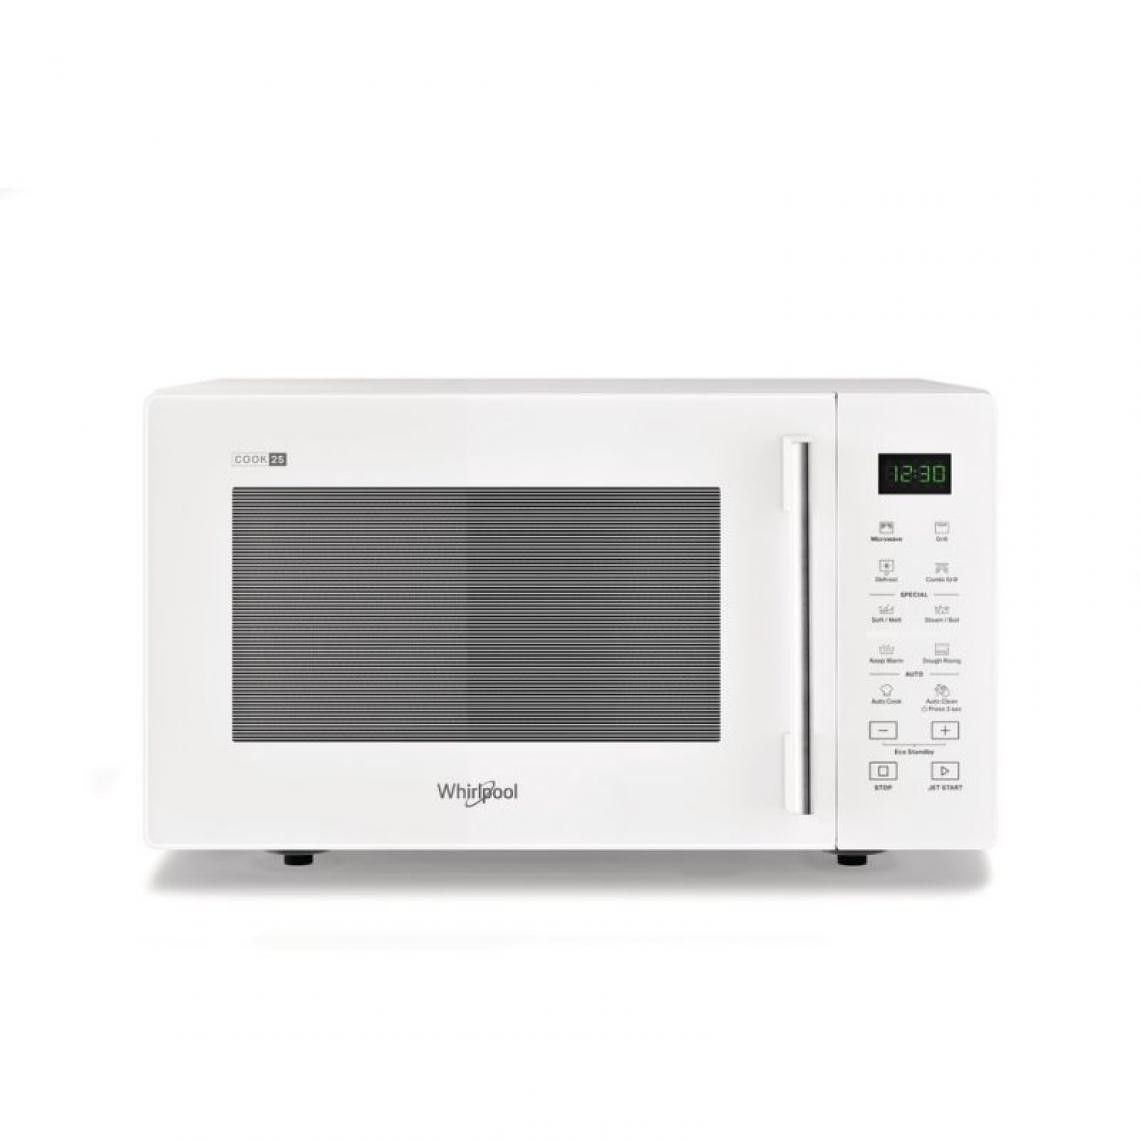 Frontiers - Whirlpool MWP 254 W Comptoir Micro-onde combiné 25 L 900 W Blanc - Four micro-ondes